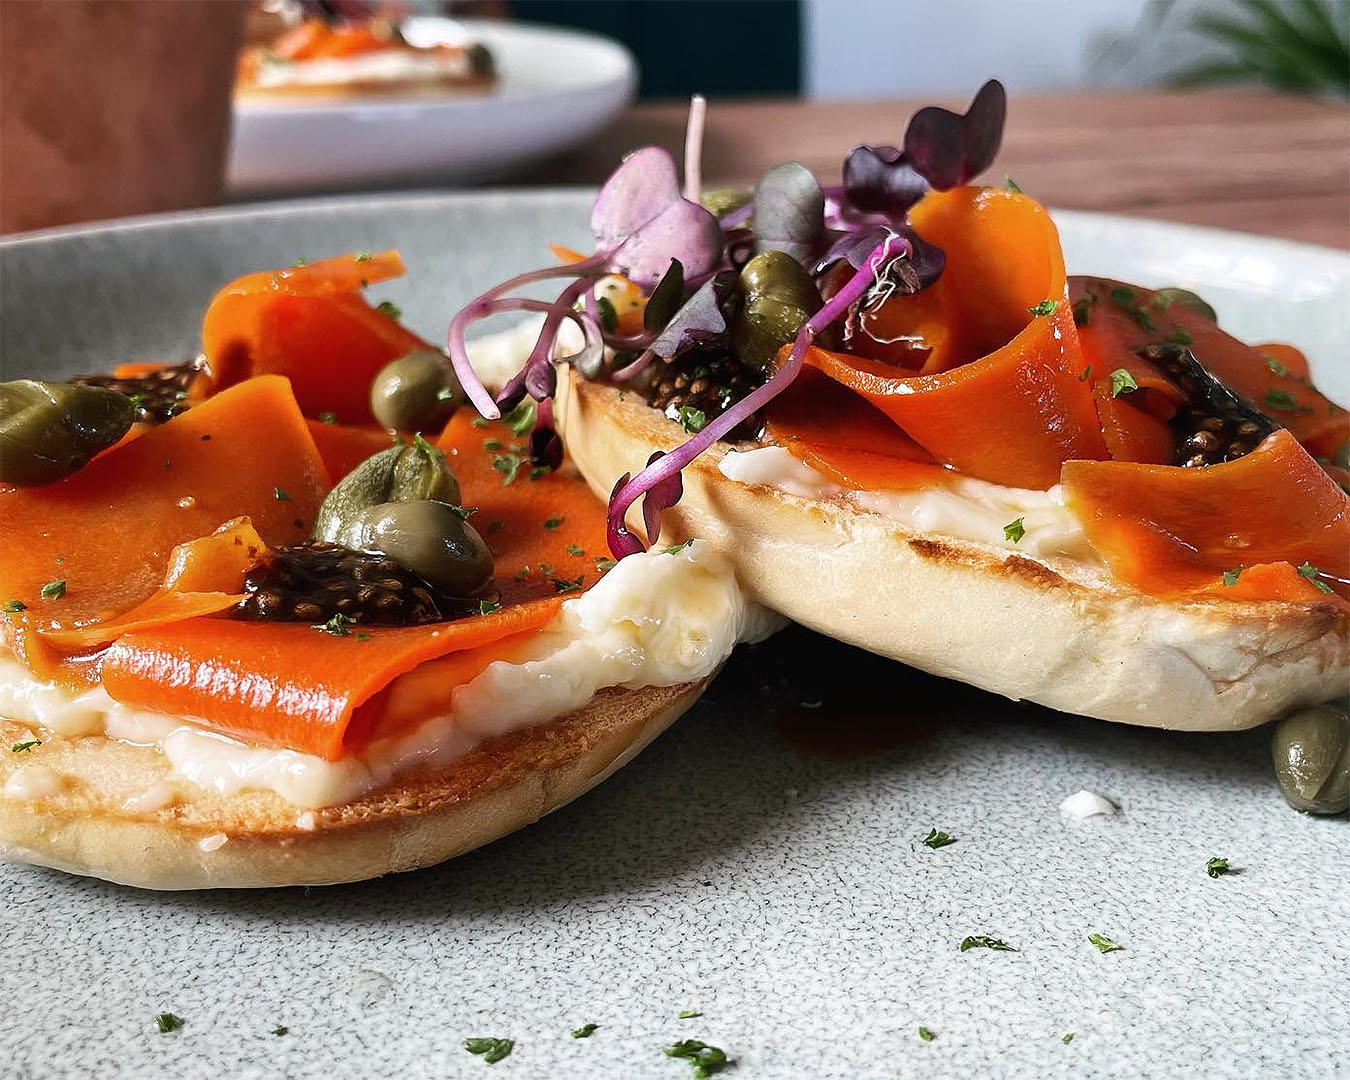 A stunning smoked salmon and cream cheese bagel at The Botanist, one of the best breakfasts in Lyall Bay, Wellington.